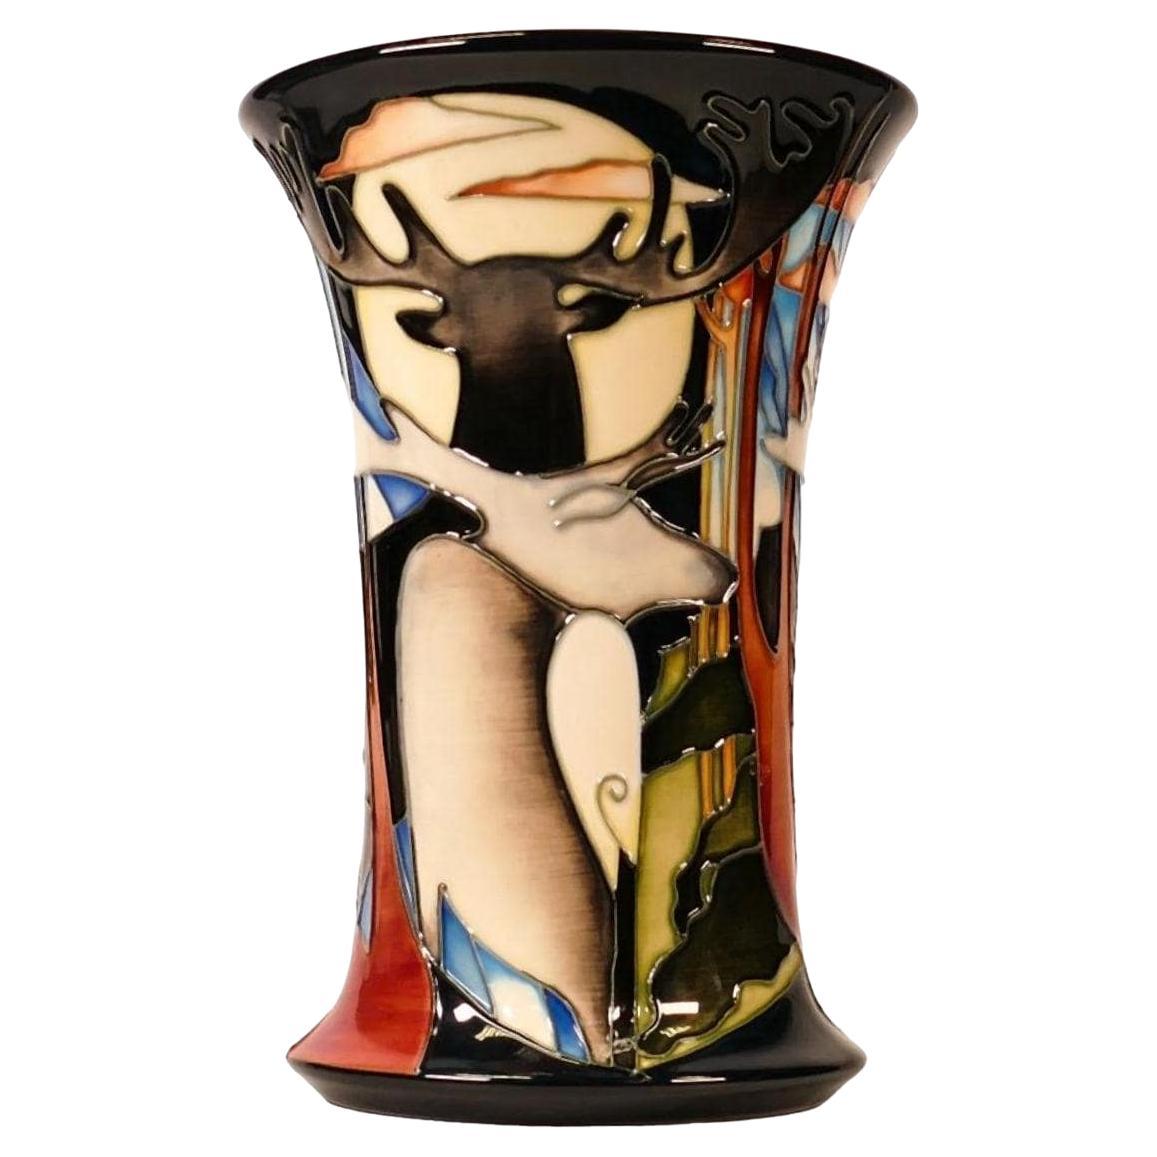 LIMITED EDITION MOORCROFT Wapiti vase by Emma Bossons dated 2012 31/35 For Sale